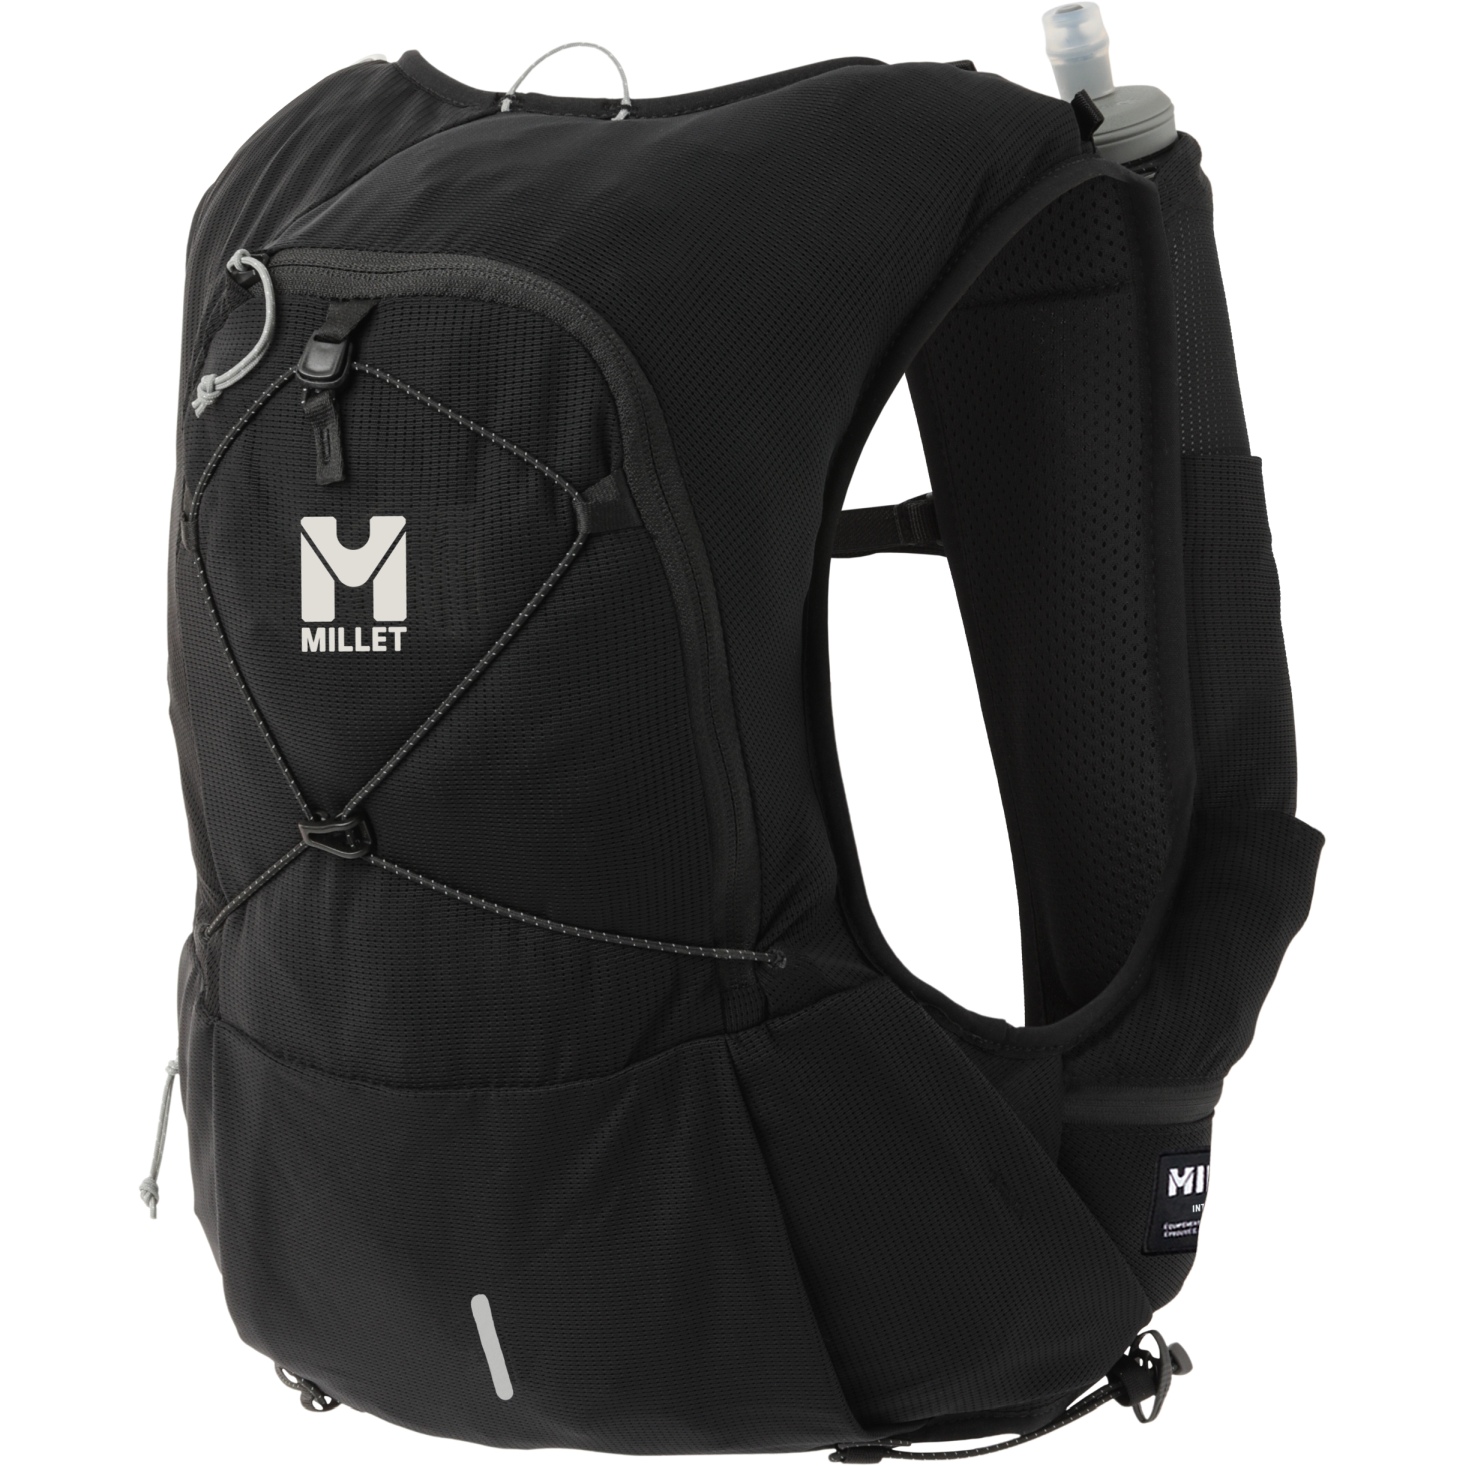 Picture of Millet Intense 12 Trail Running Backpack - Black N0247